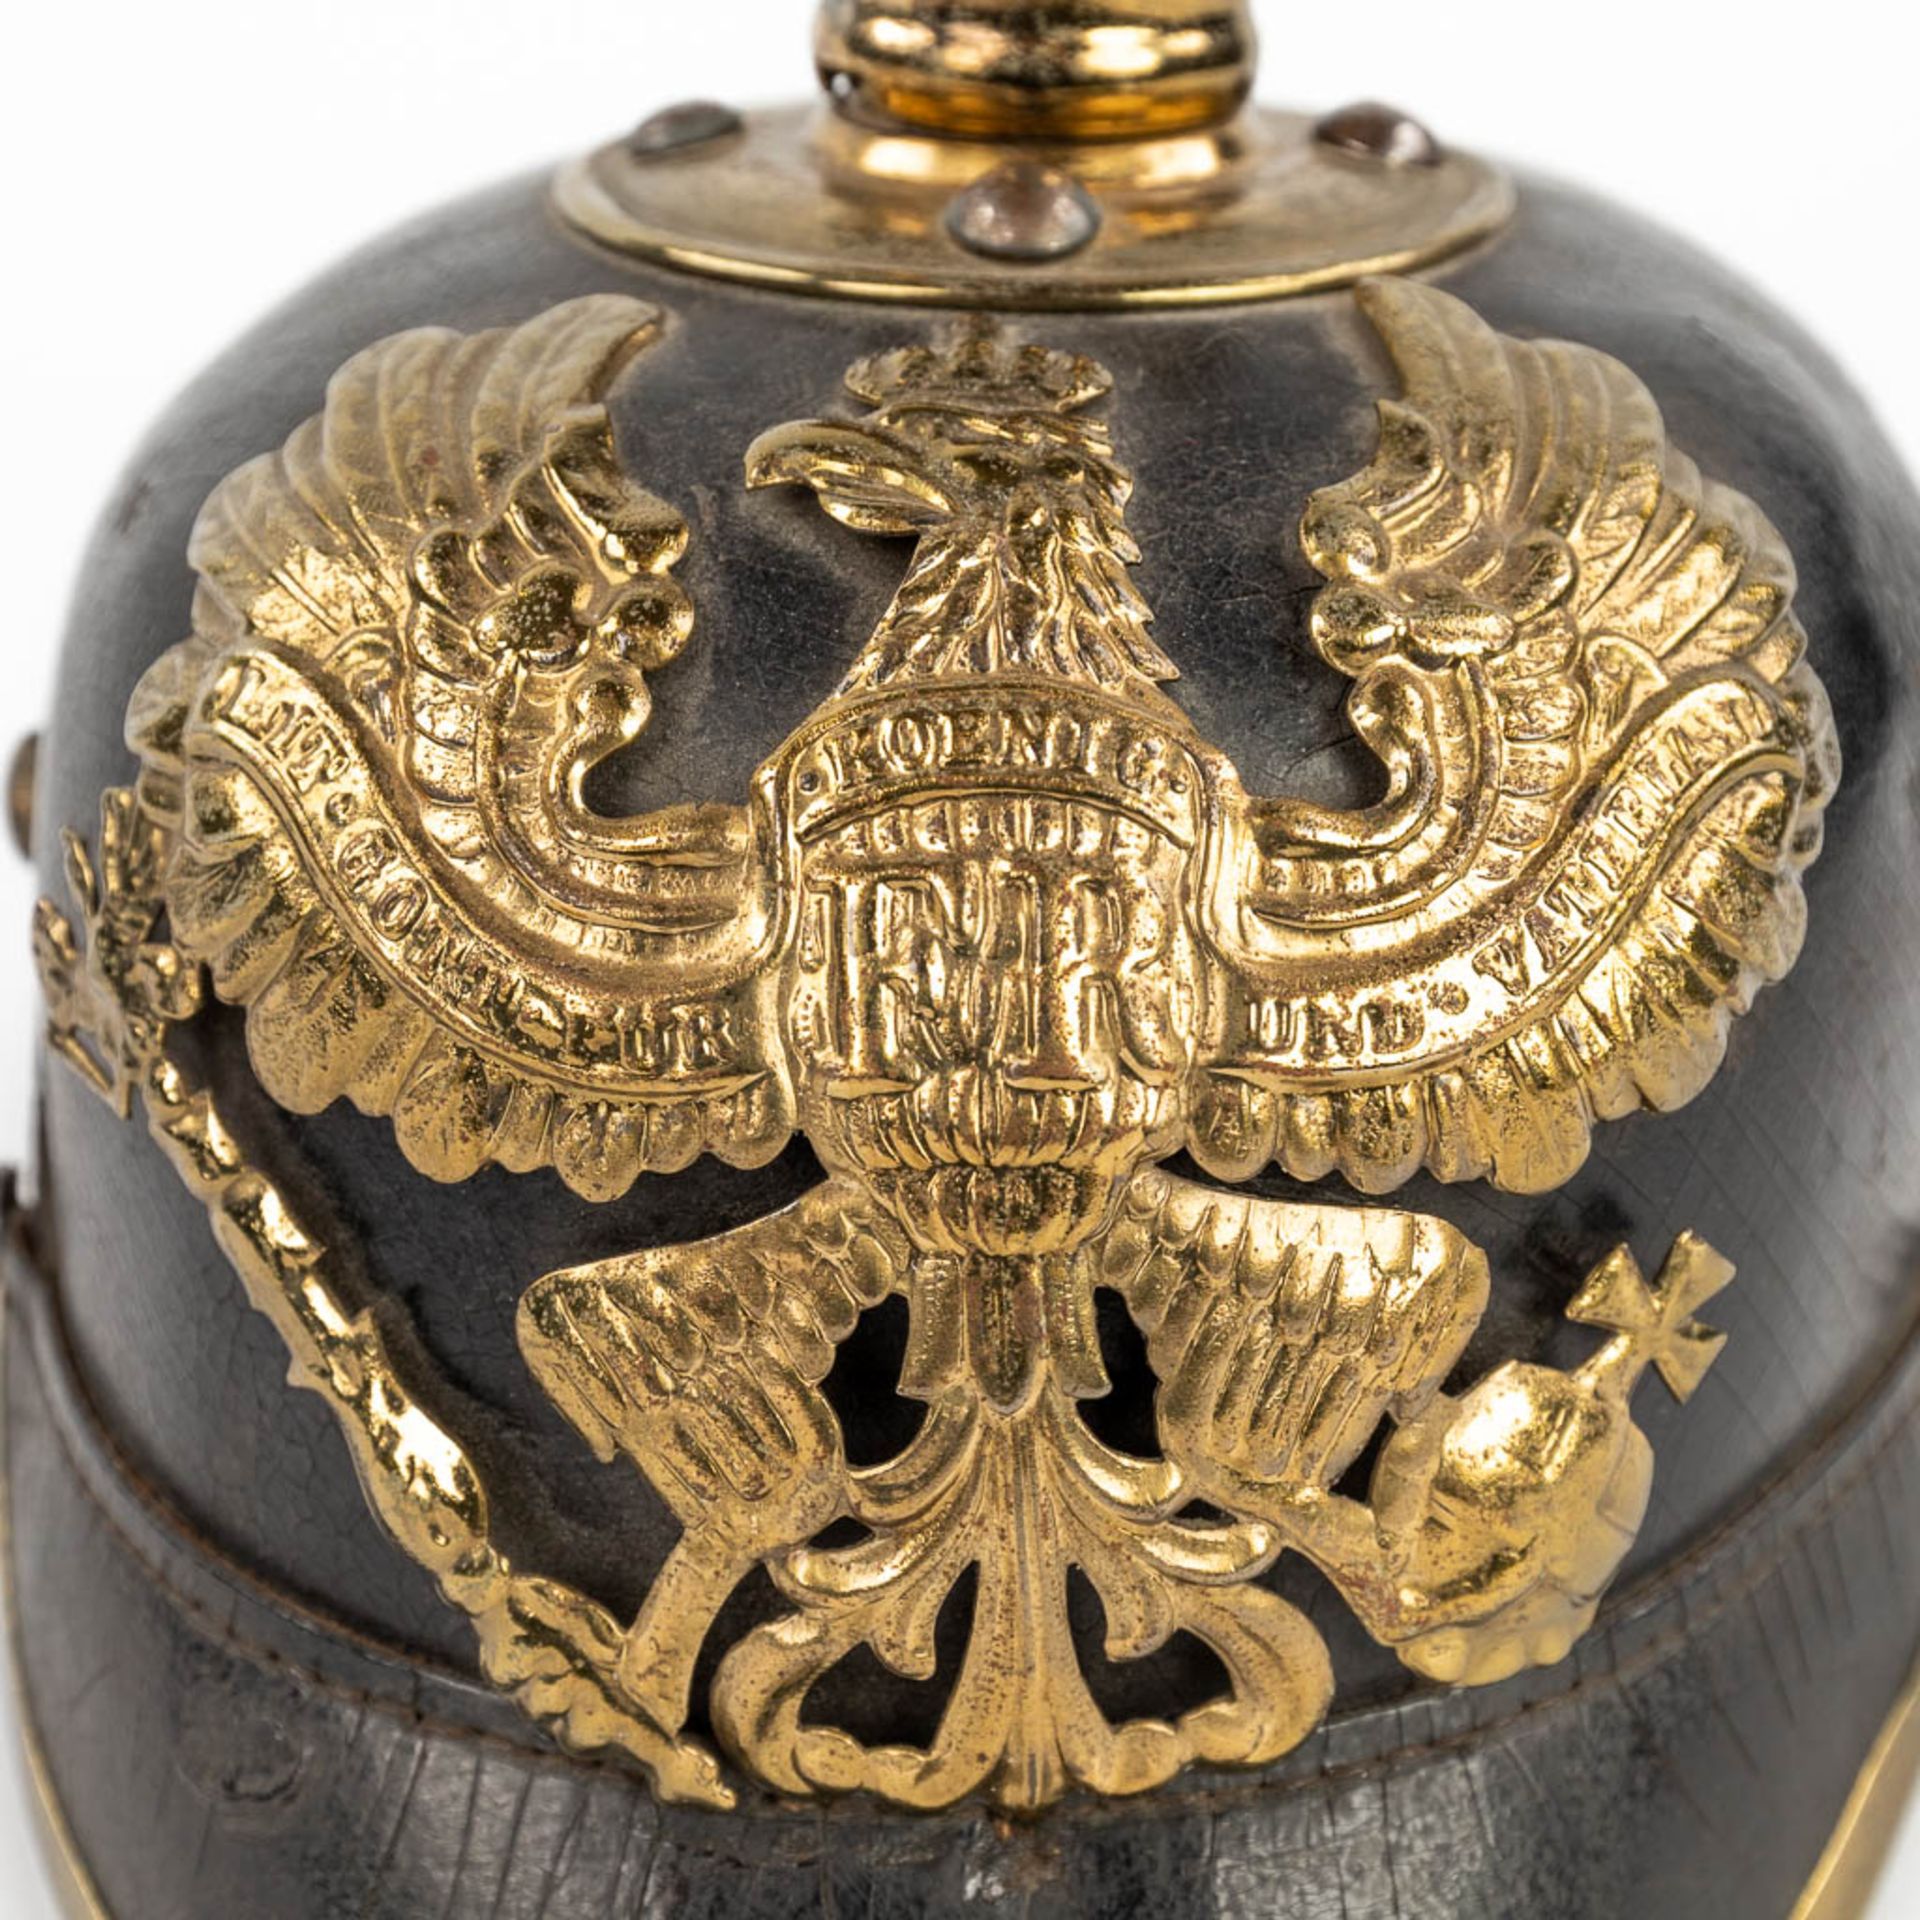 An antique German 'Pickelhaube' decorated with an eagle. Dating 1914-1918. (L:25 x W:18 x H:21 cm) - Bild 14 aus 17